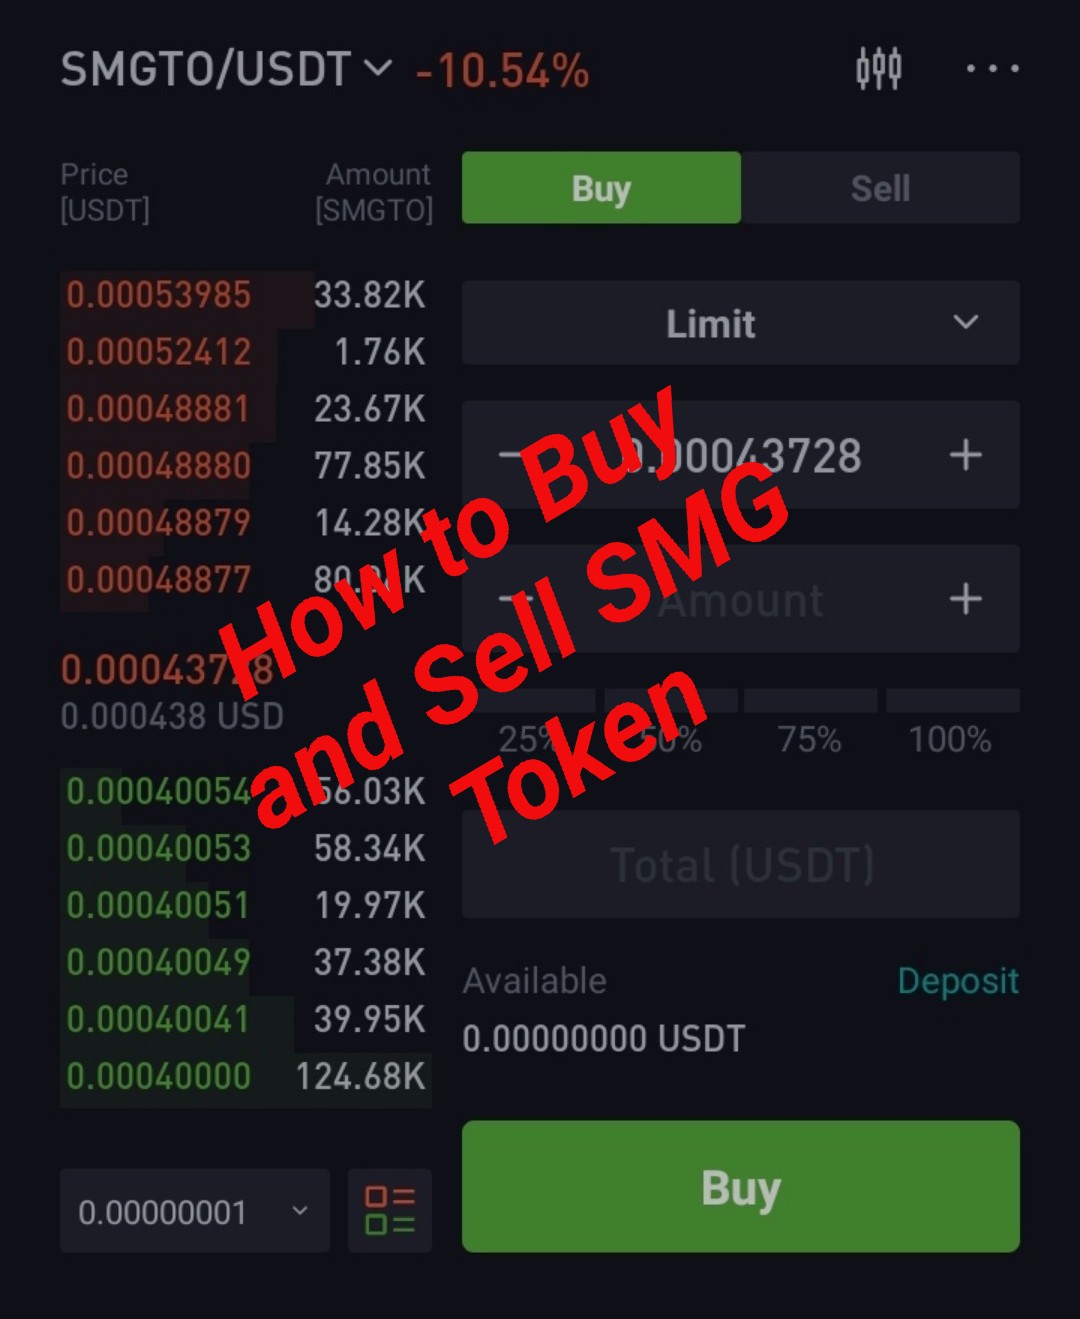 How To Buy and Sell SMG Token